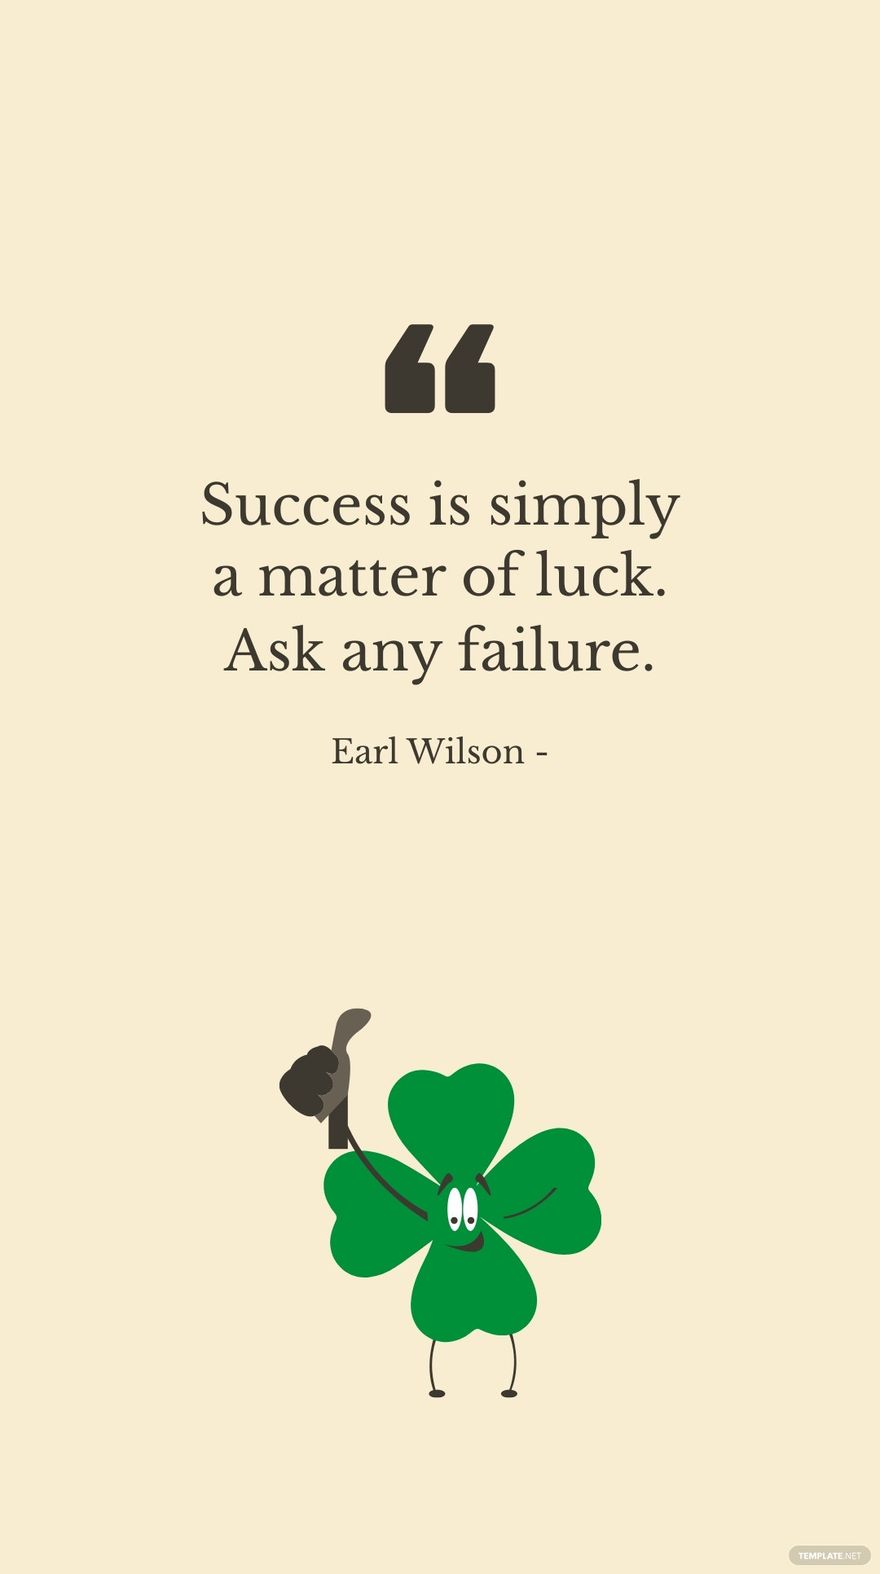 Earl Wilson - Success is simply a matter of luck. Ask any failure.